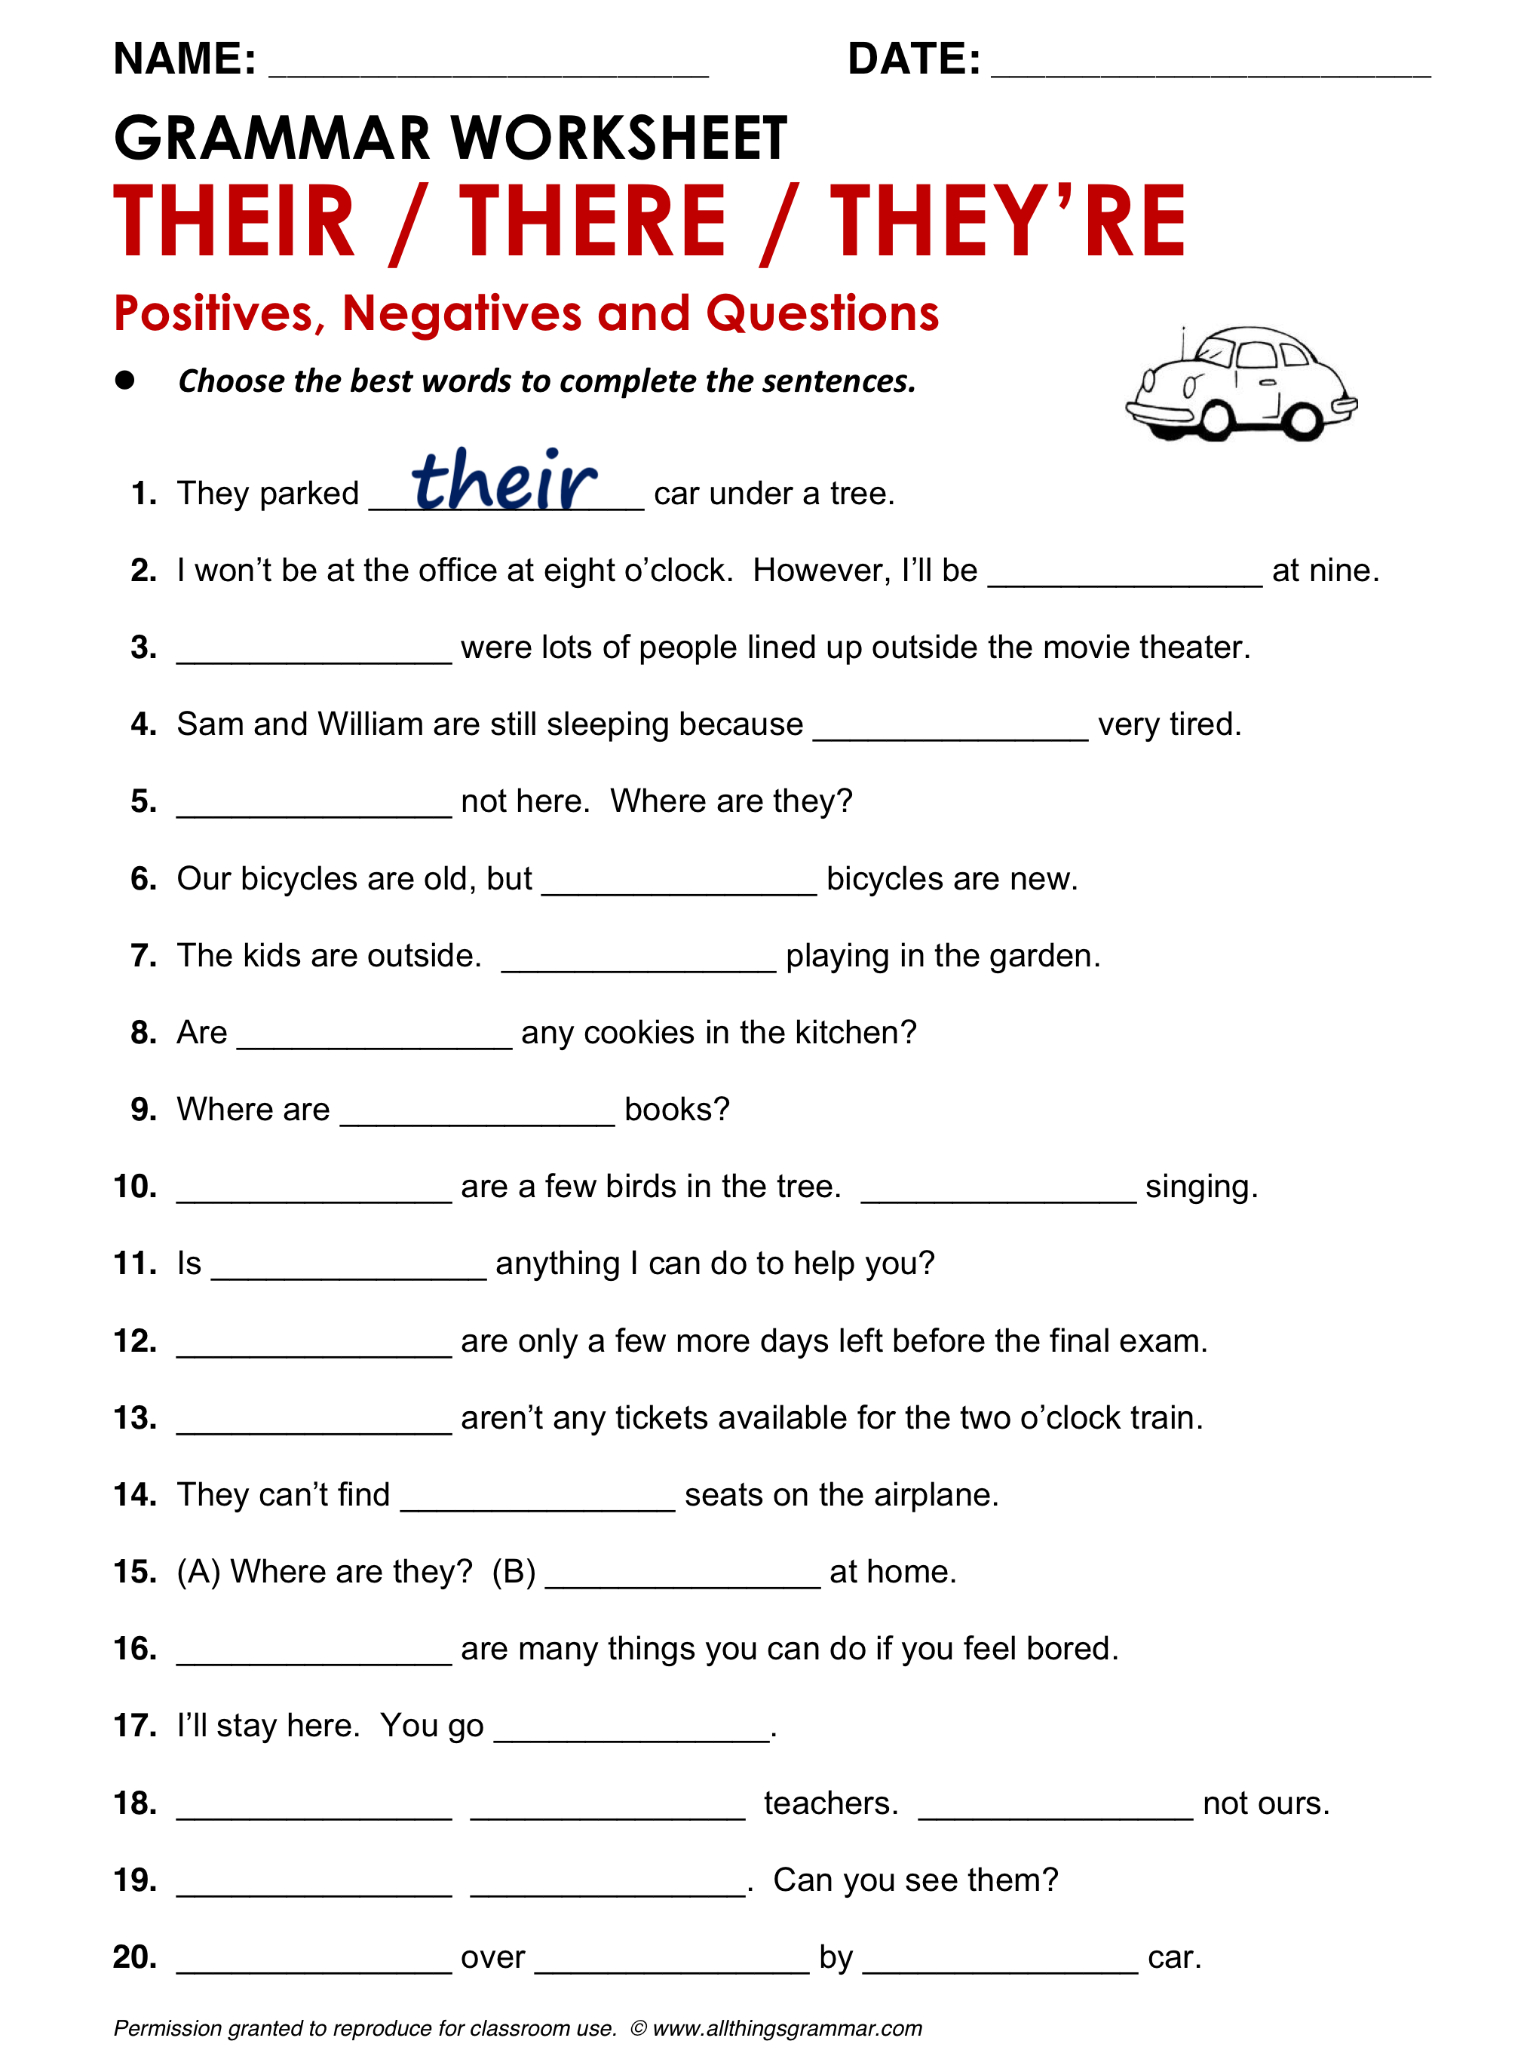 Worksheets Pages : Awesome Printable Grammar Worksheets Image - Free Printable Grammar Worksheets For Highschool Students